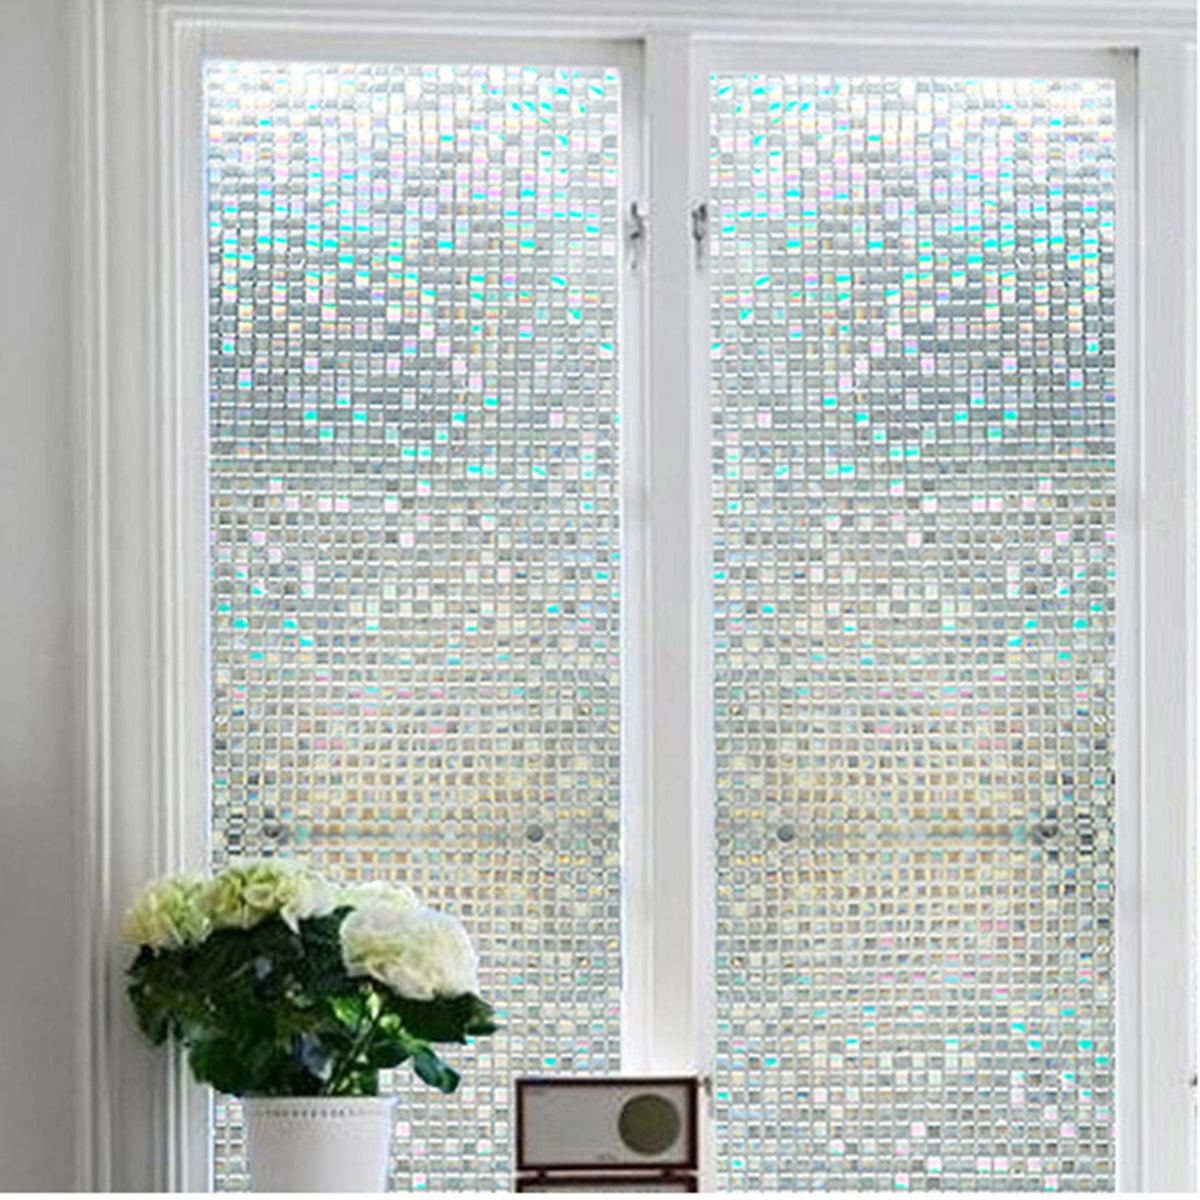 Static Cling Cover Window Glass Film Sticker Privacy Home Decoration 45cm*2m